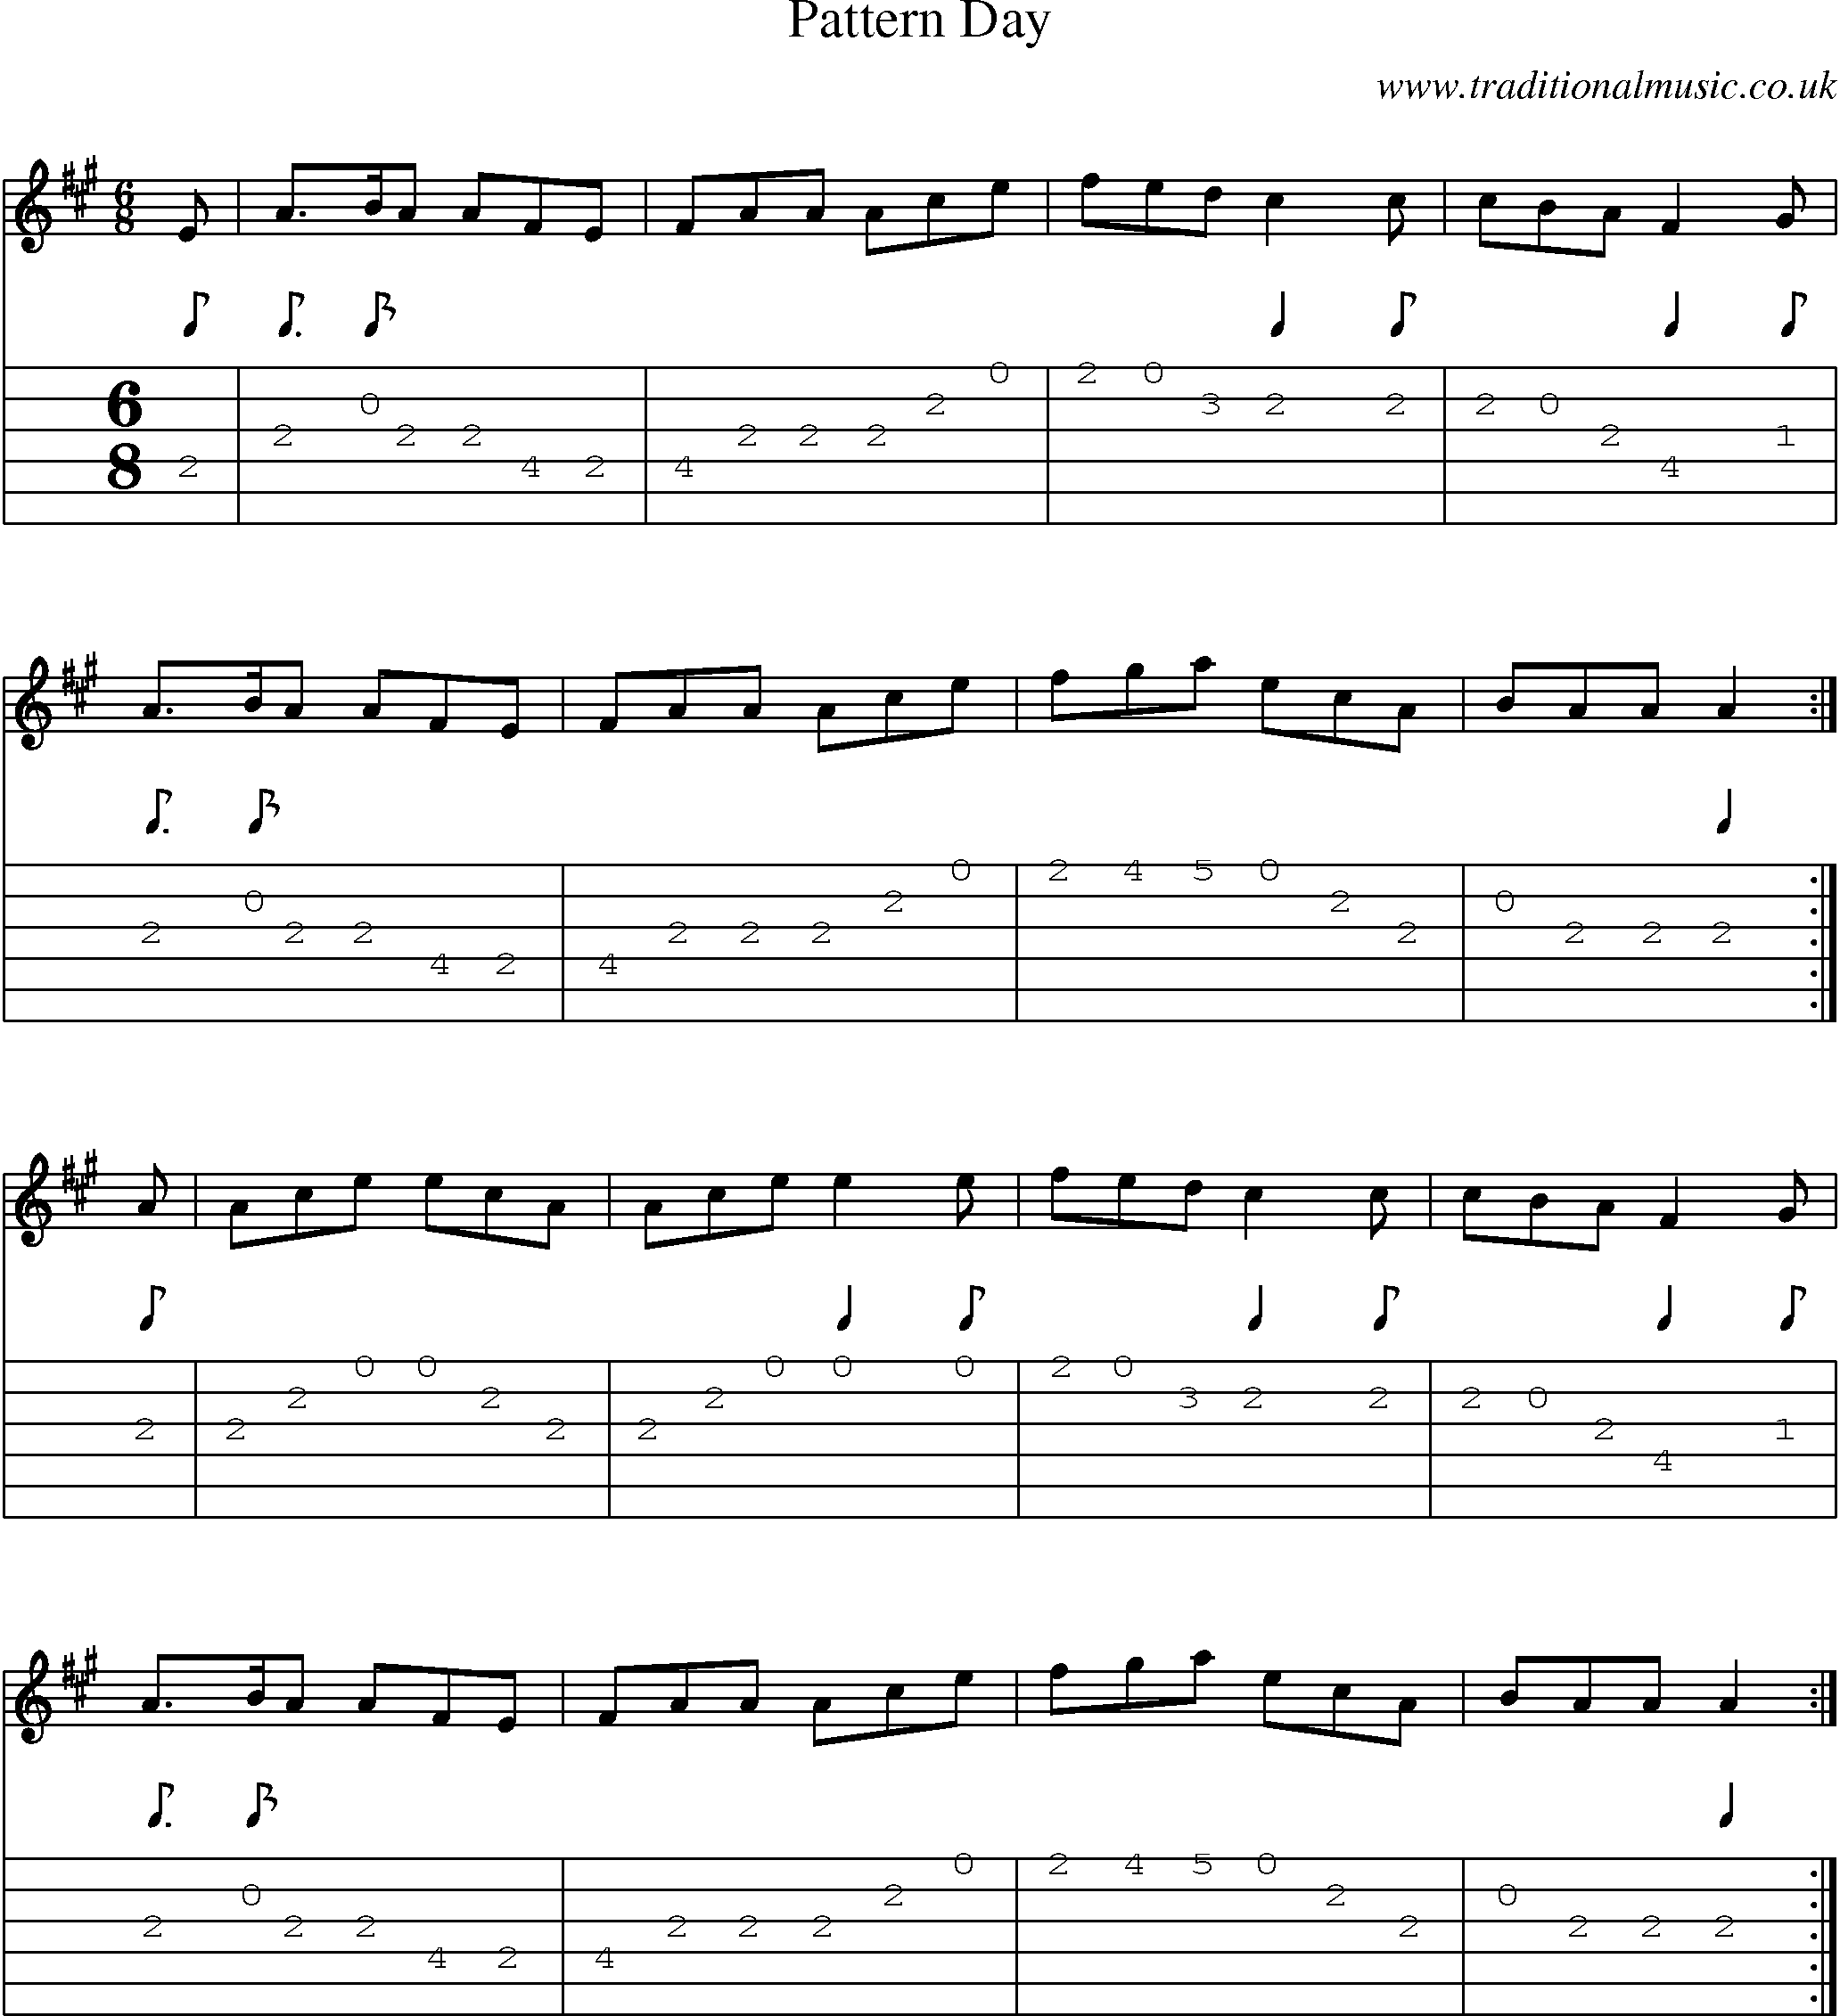 Music Score and Guitar Tabs for Pattern Day